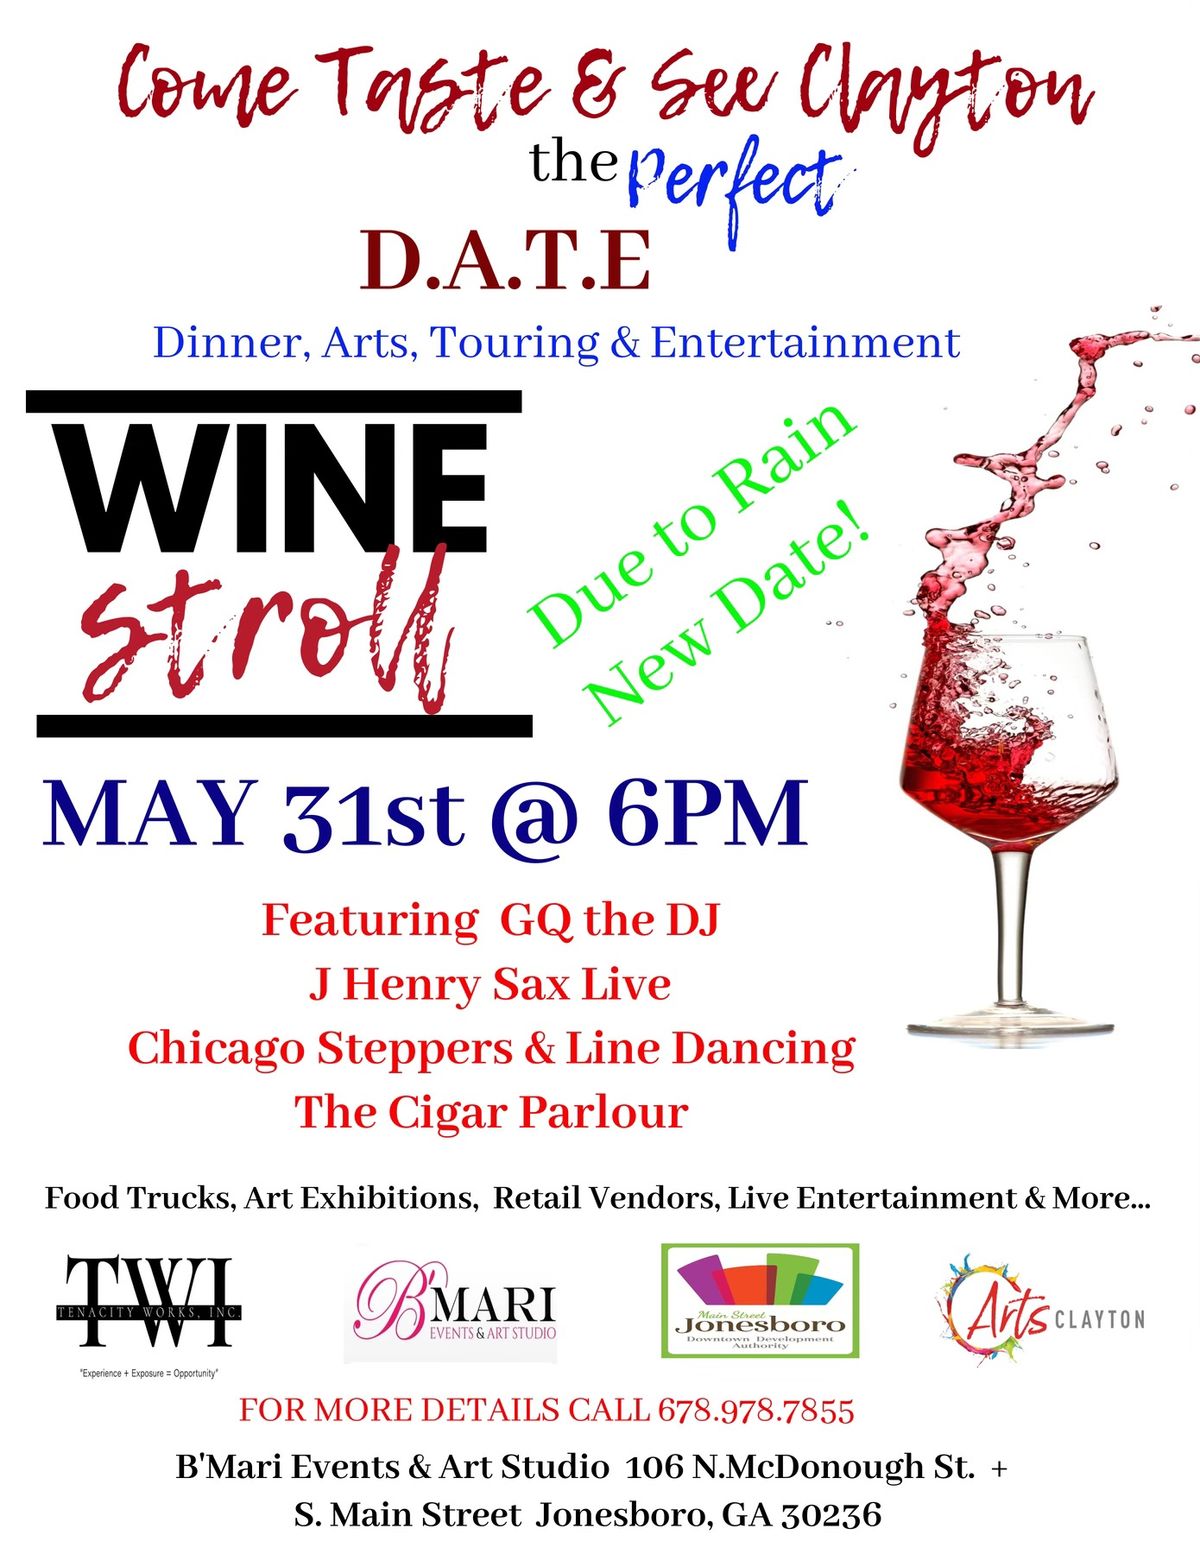 Come Taste and See Wine Stroll - Part 2